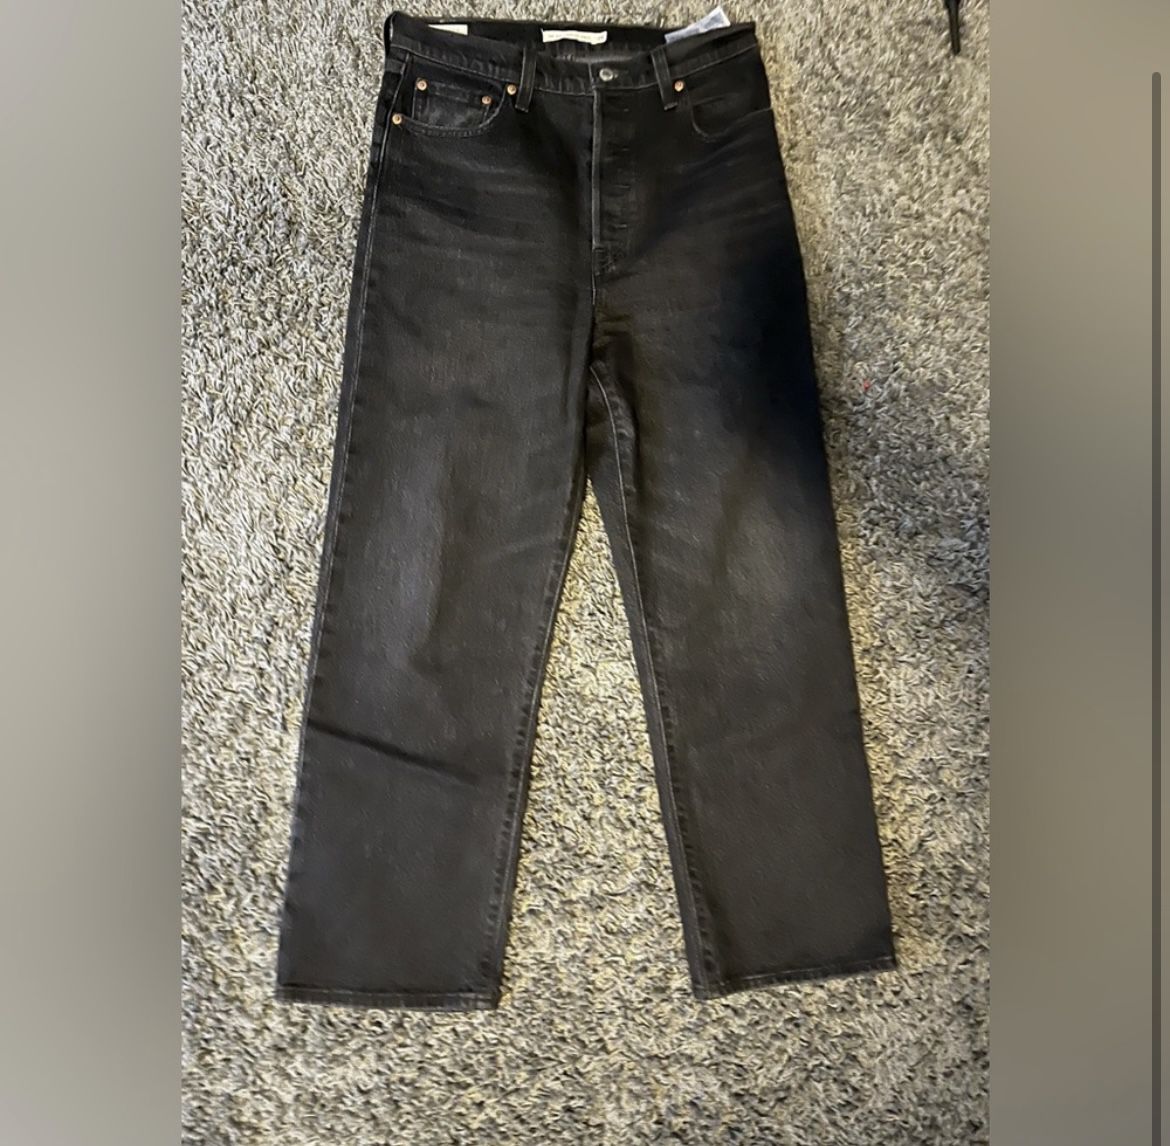 Levi’s Ribcage Straight Ankle Jeans Size W29 L/27